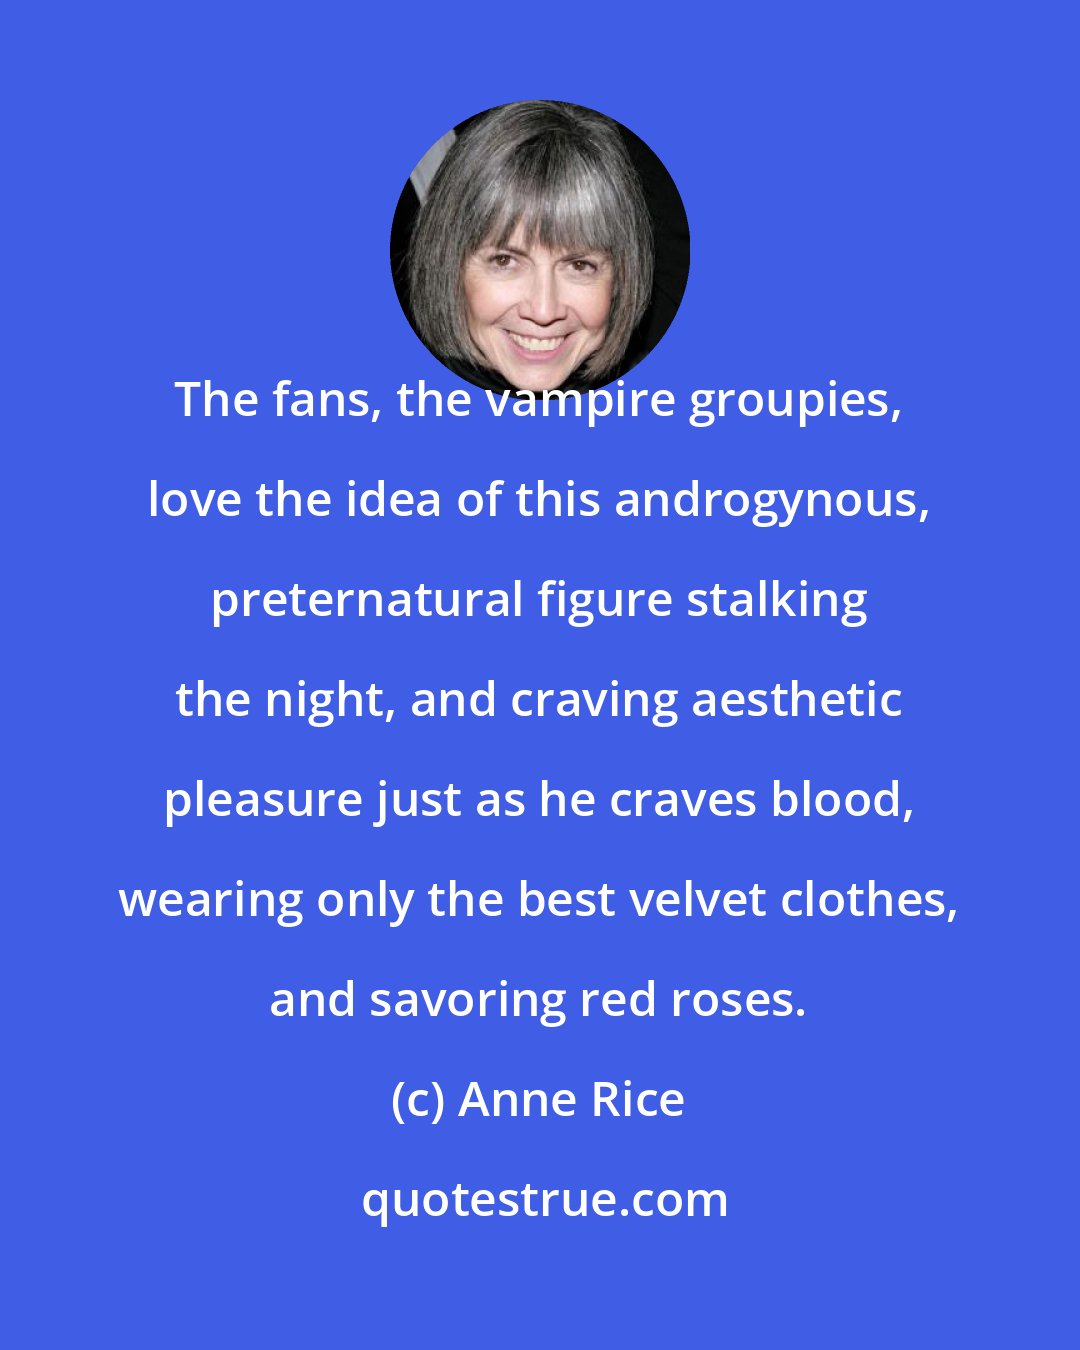 Anne Rice: The fans, the vampire groupies, love the idea of this androgynous, preternatural figure stalking the night, and craving aesthetic pleasure just as he craves blood, wearing only the best velvet clothes, and savoring red roses.